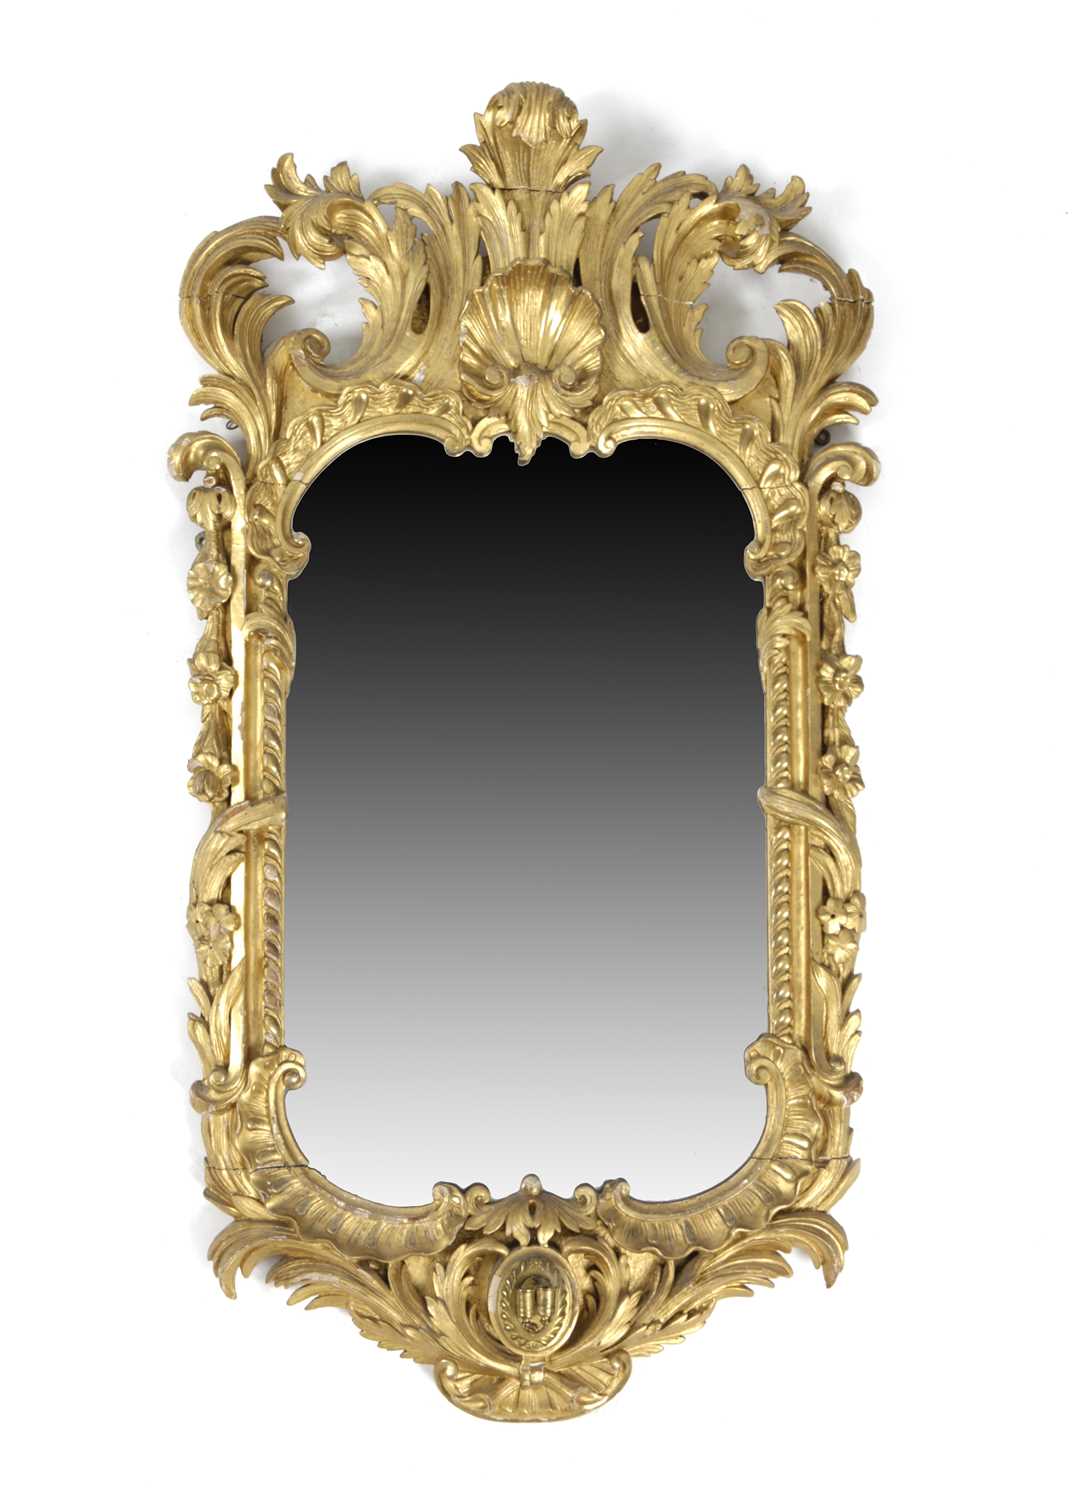 A GEORGE II SCOTTISH GILTWOOD GIRANDOLE WALL MIRROR C.1755 the later plate within a frame carved - Image 2 of 2